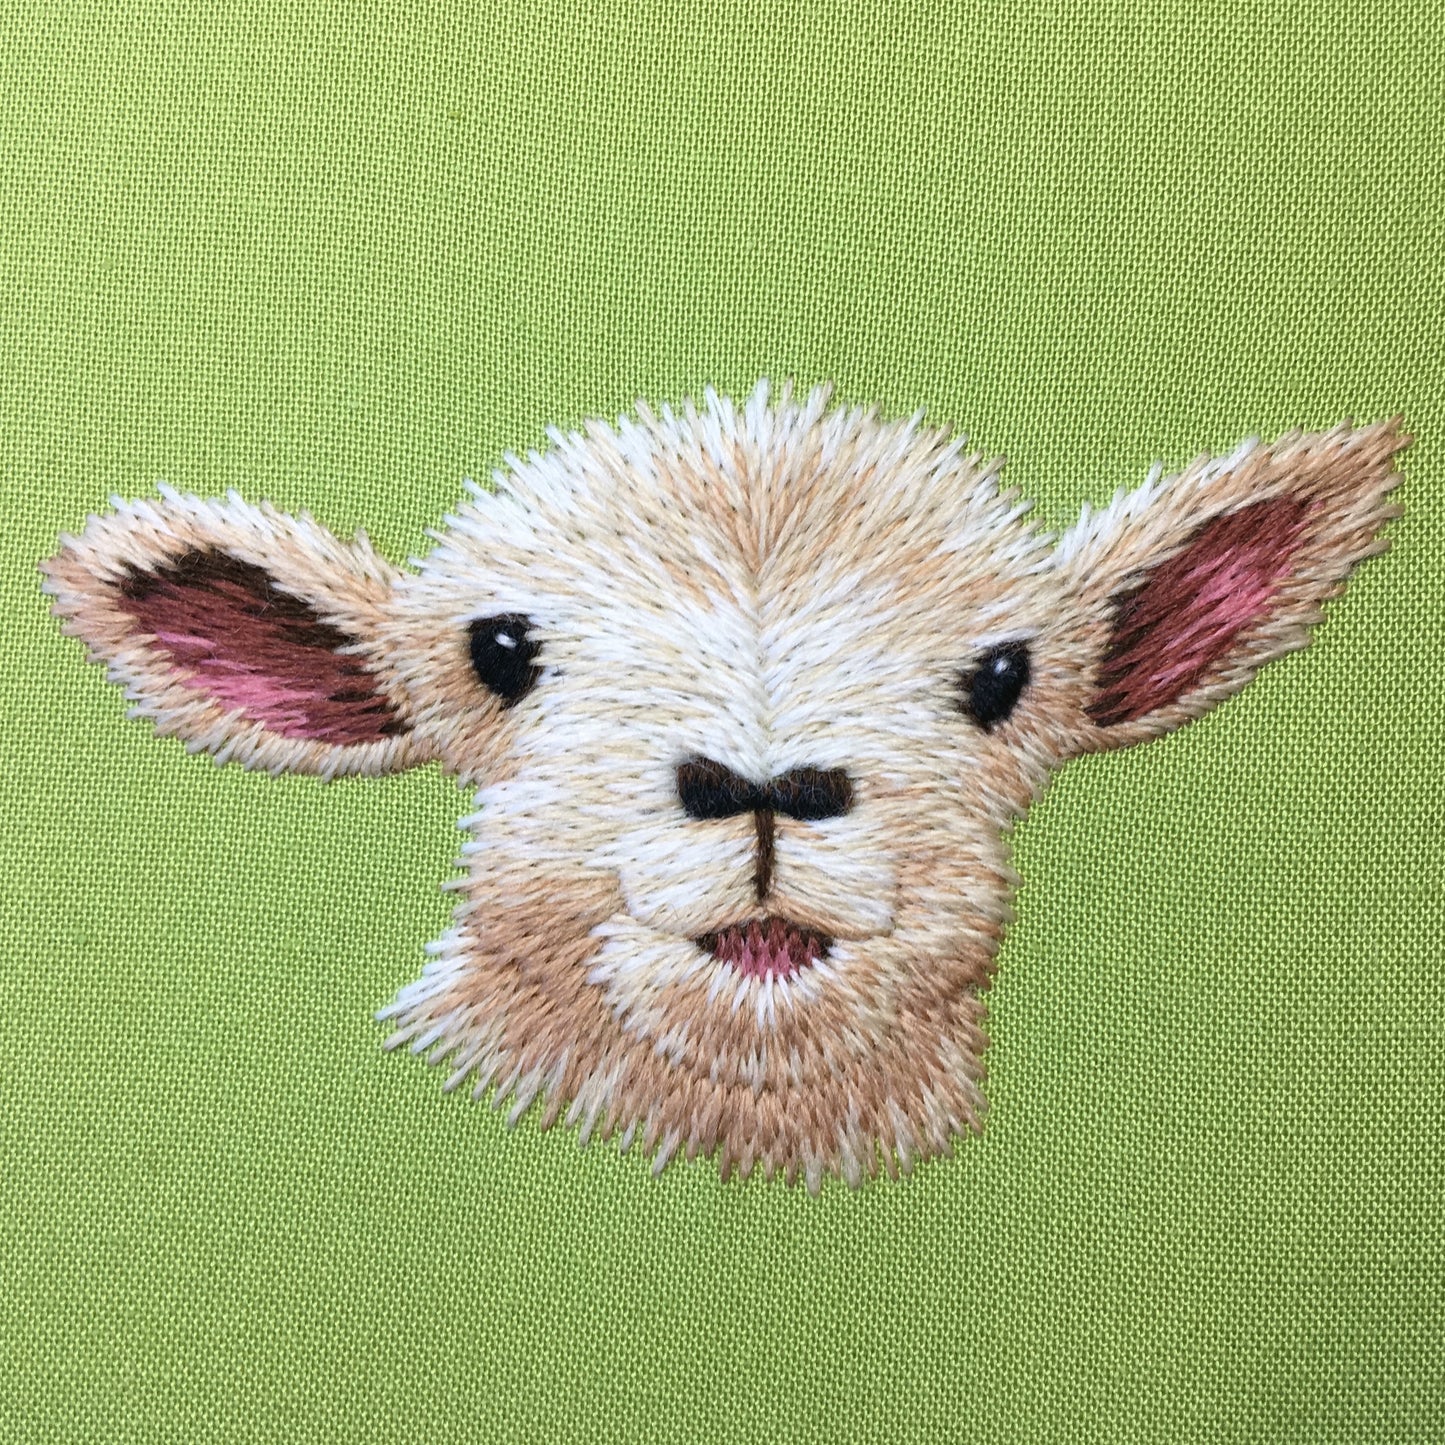 'Spring Lamb' Crewelwork Embroidery Kit